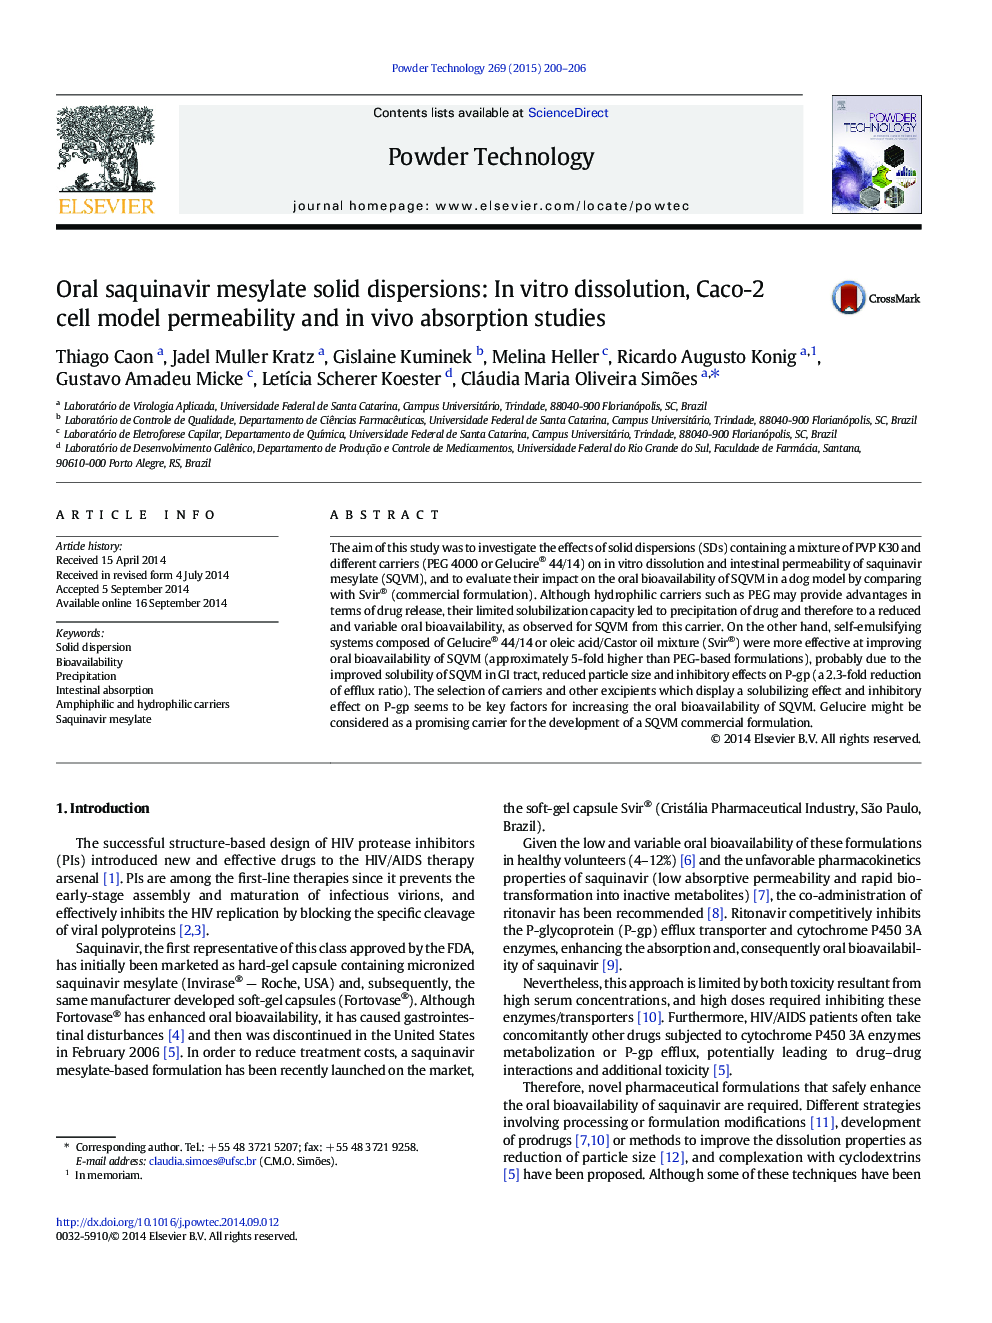 Oral saquinavir mesylate solid dispersions: In vitro dissolution, Caco-2 cell model permeability and in vivo absorption studies